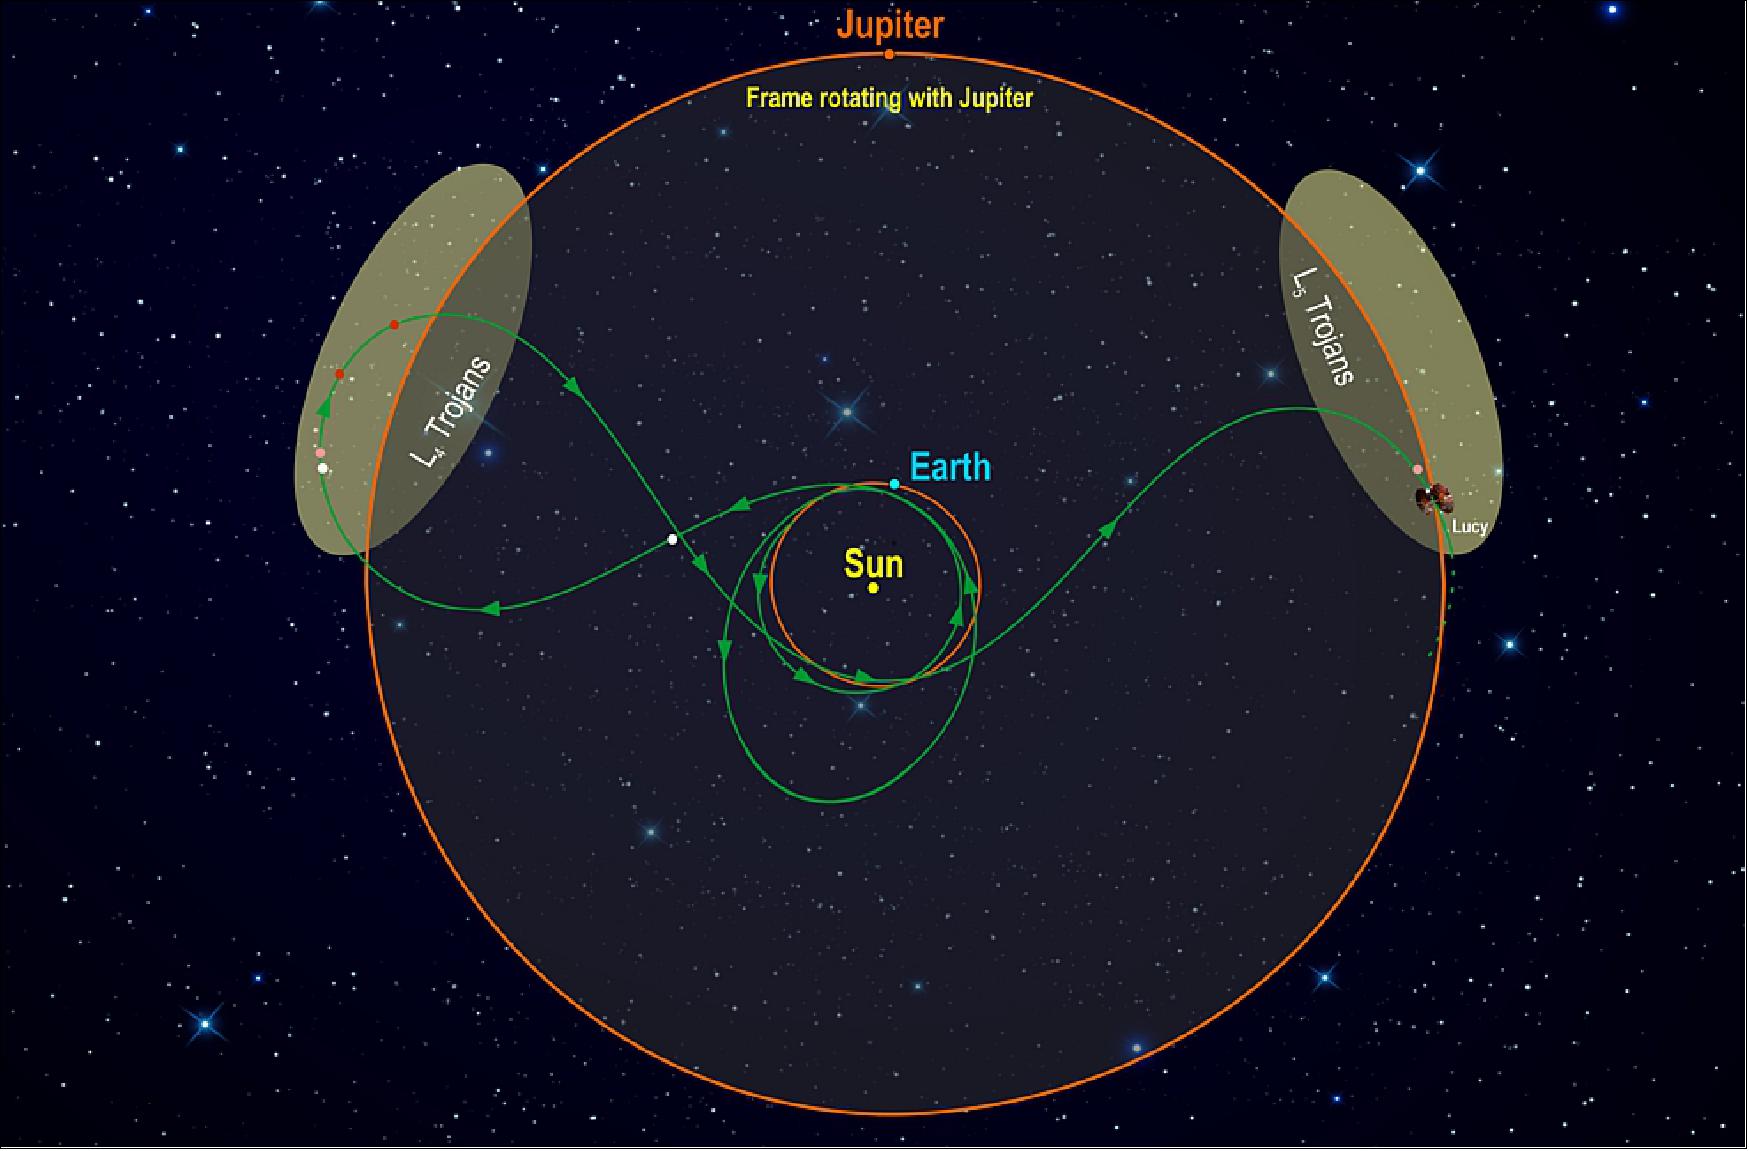 Figure 2: This diagram illustrates Lucy's orbital path. The spacecraft's path (green) is shown in a frame of reference where Jupiter remains stationary, giving the trajectory its pretzel-like shape. After launch in October 2021, Lucy has two close Earth flybys before encountering its Trojan targets. In the L4 cloud Lucy will fly by (3548) Eurybates (white), (15094) Polymele (pink), (11351) Leucus (red), and (21900) Orus (red) from 2027-2028. After diving past Earth again Lucy will visit the L5 cloud and encounter the (617) Patroclus-Menoetius binary (pink) in 2033. As a bonus, in 2025 on the way to the L4, Lucy flies by a small Main Belt asteroid, (52246) Donaldjohanson (white), named for the discoverer of the Lucy fossil. After flying by the Patroclus-Menoetius binary in 2033, Lucy will continue cycling between the two Trojan clouds every six years (image credit: Southwest Research Institute)